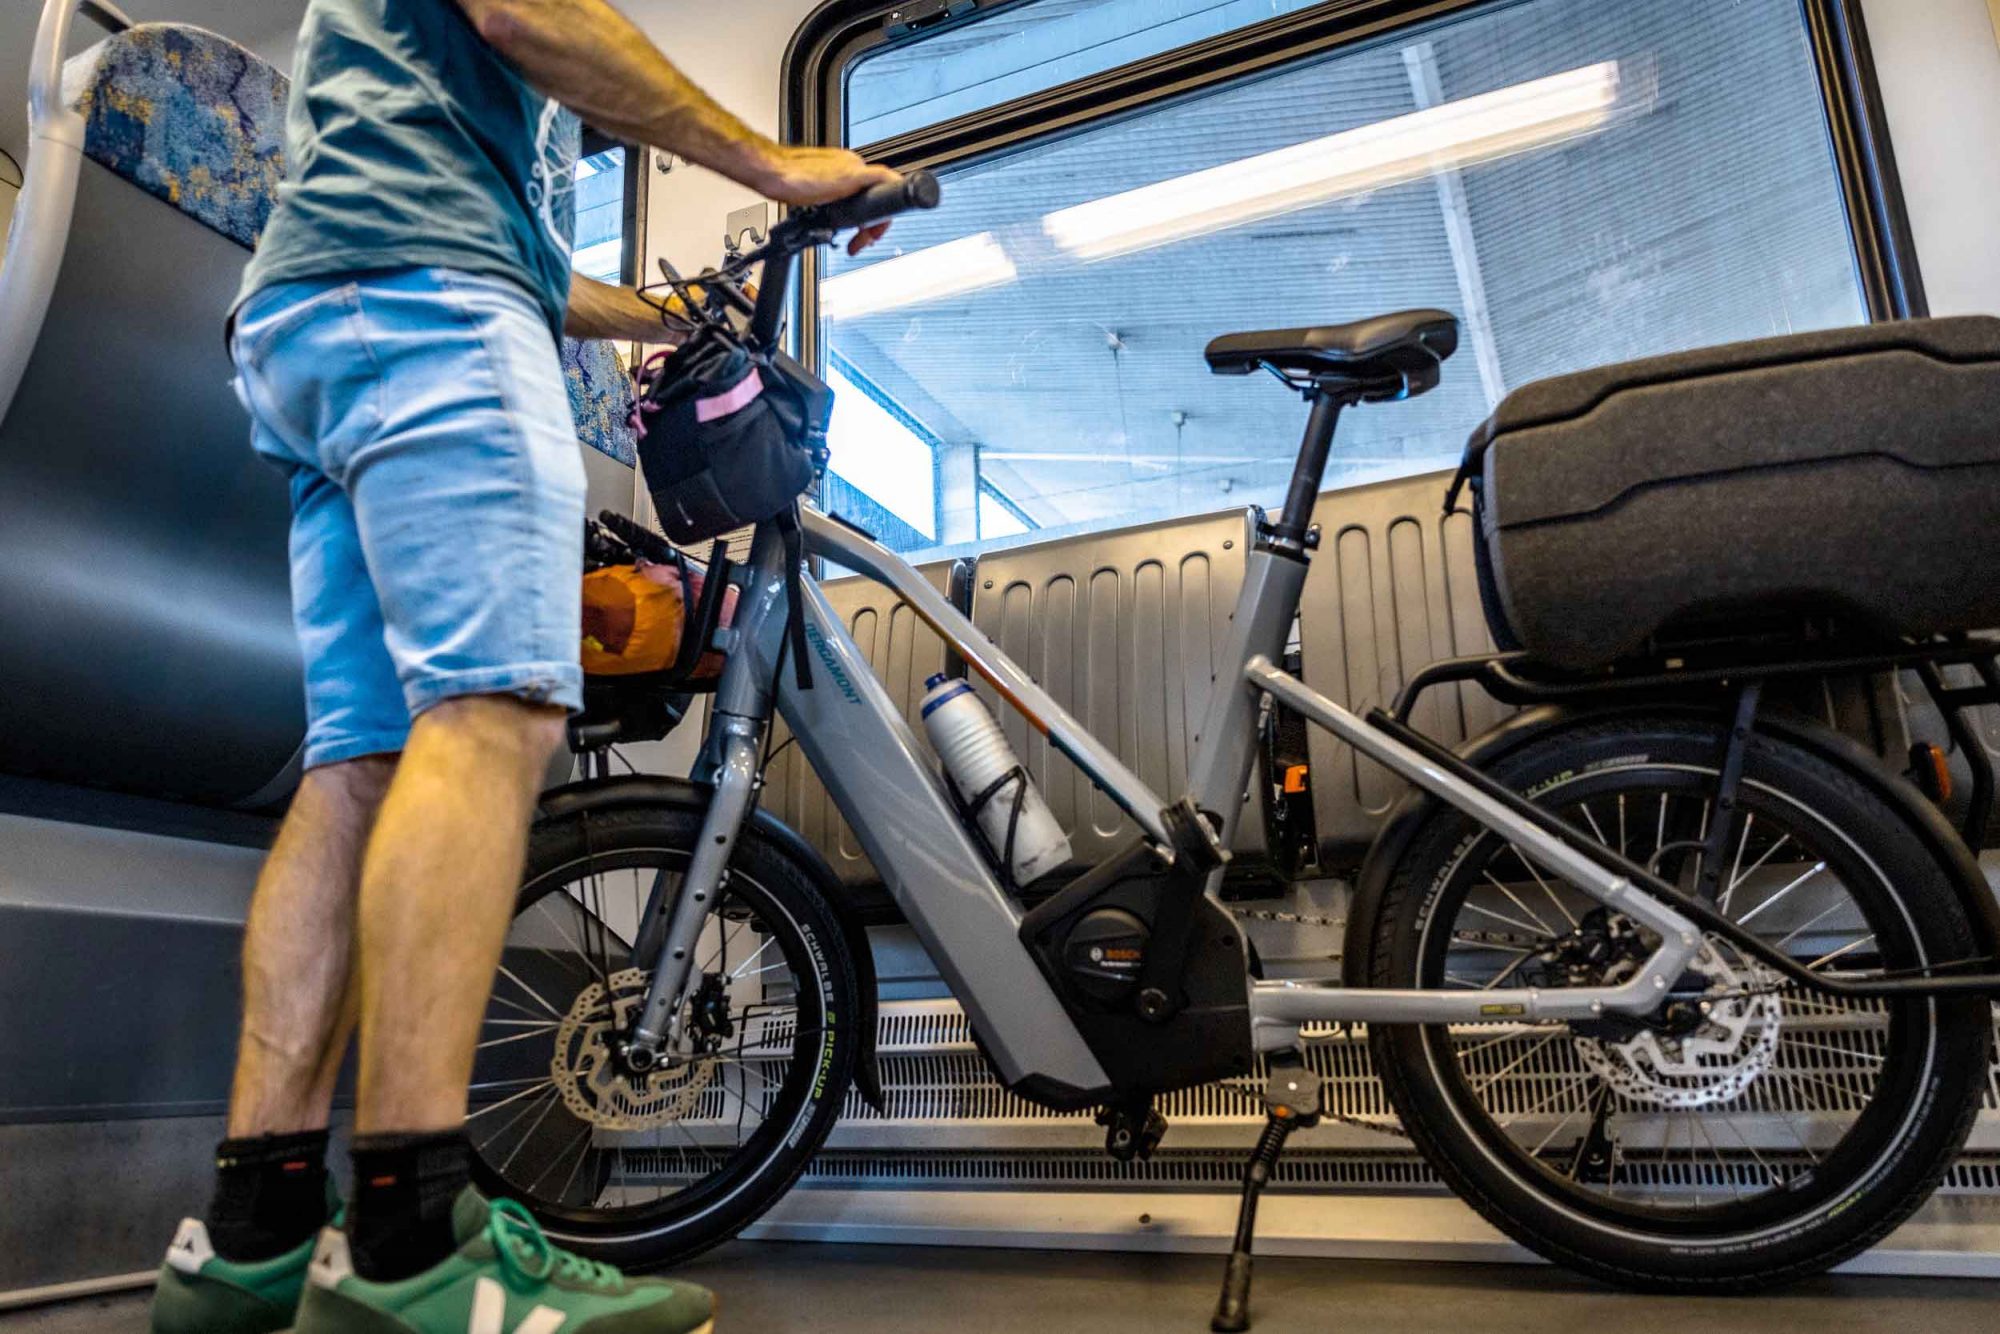 Bergamont hans-e test: the small bike fits perfectly on the train!